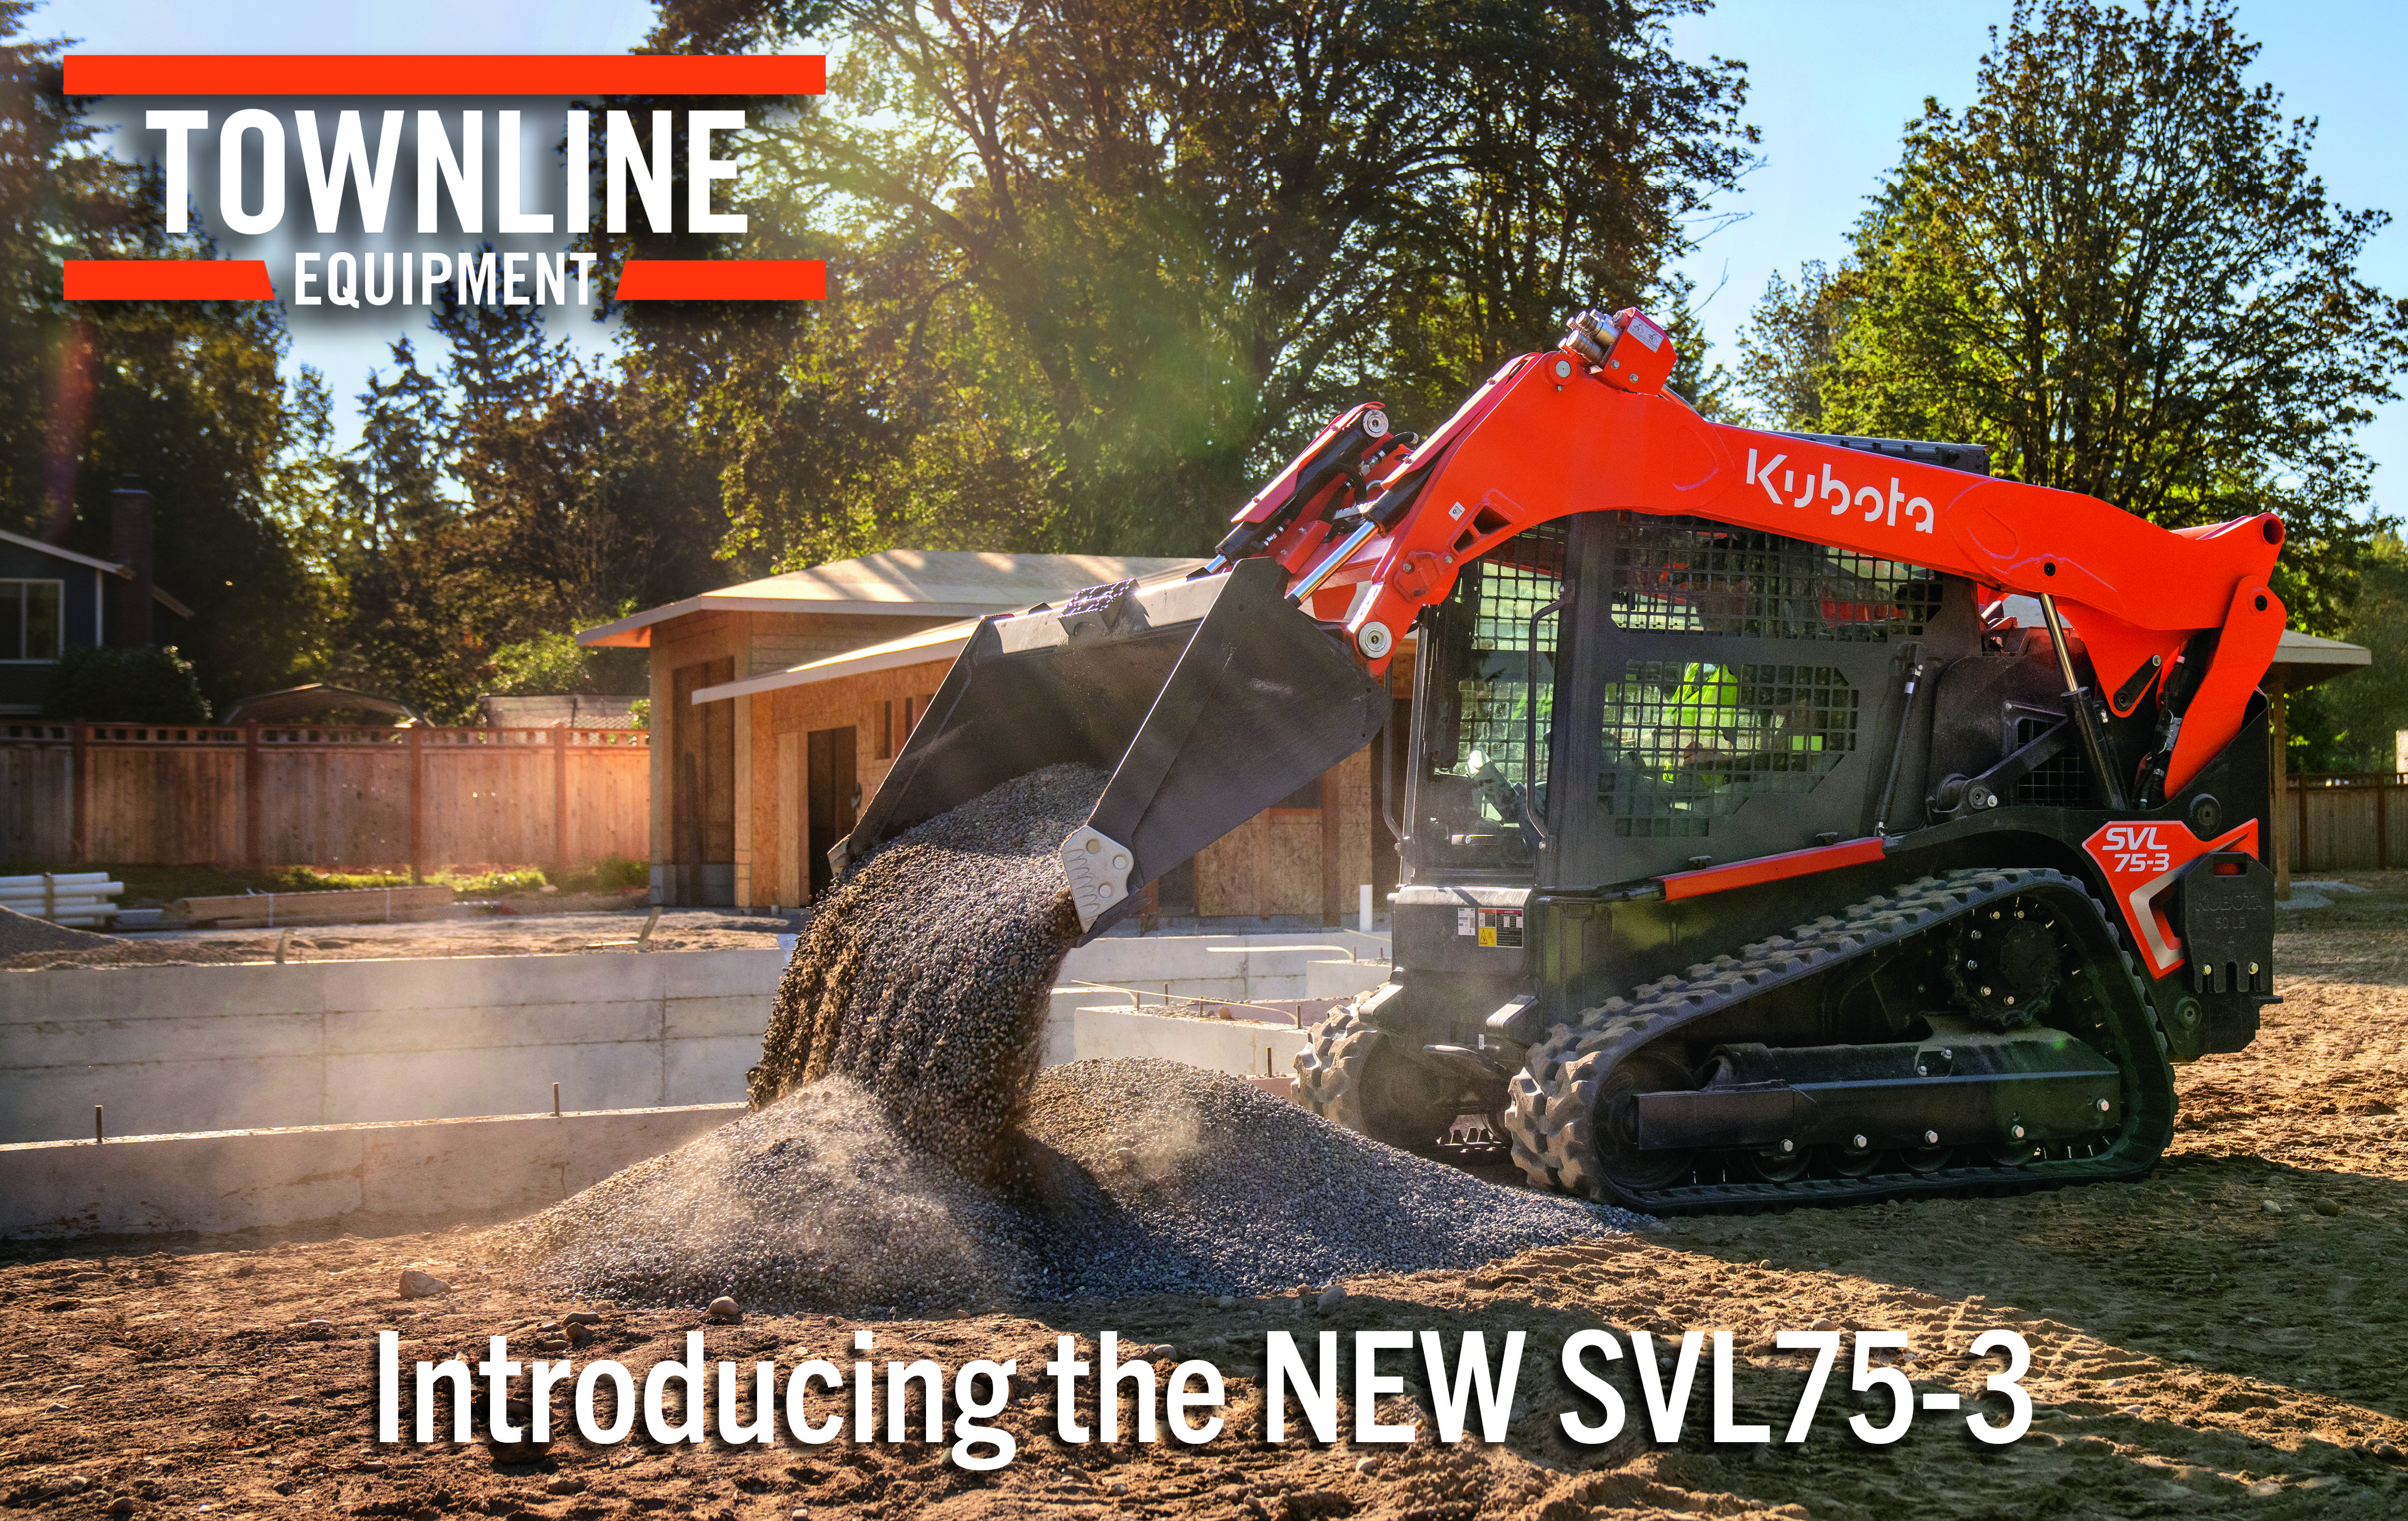 THE NEW SVL75-3 YOU'VE BEEN WAITING FOR